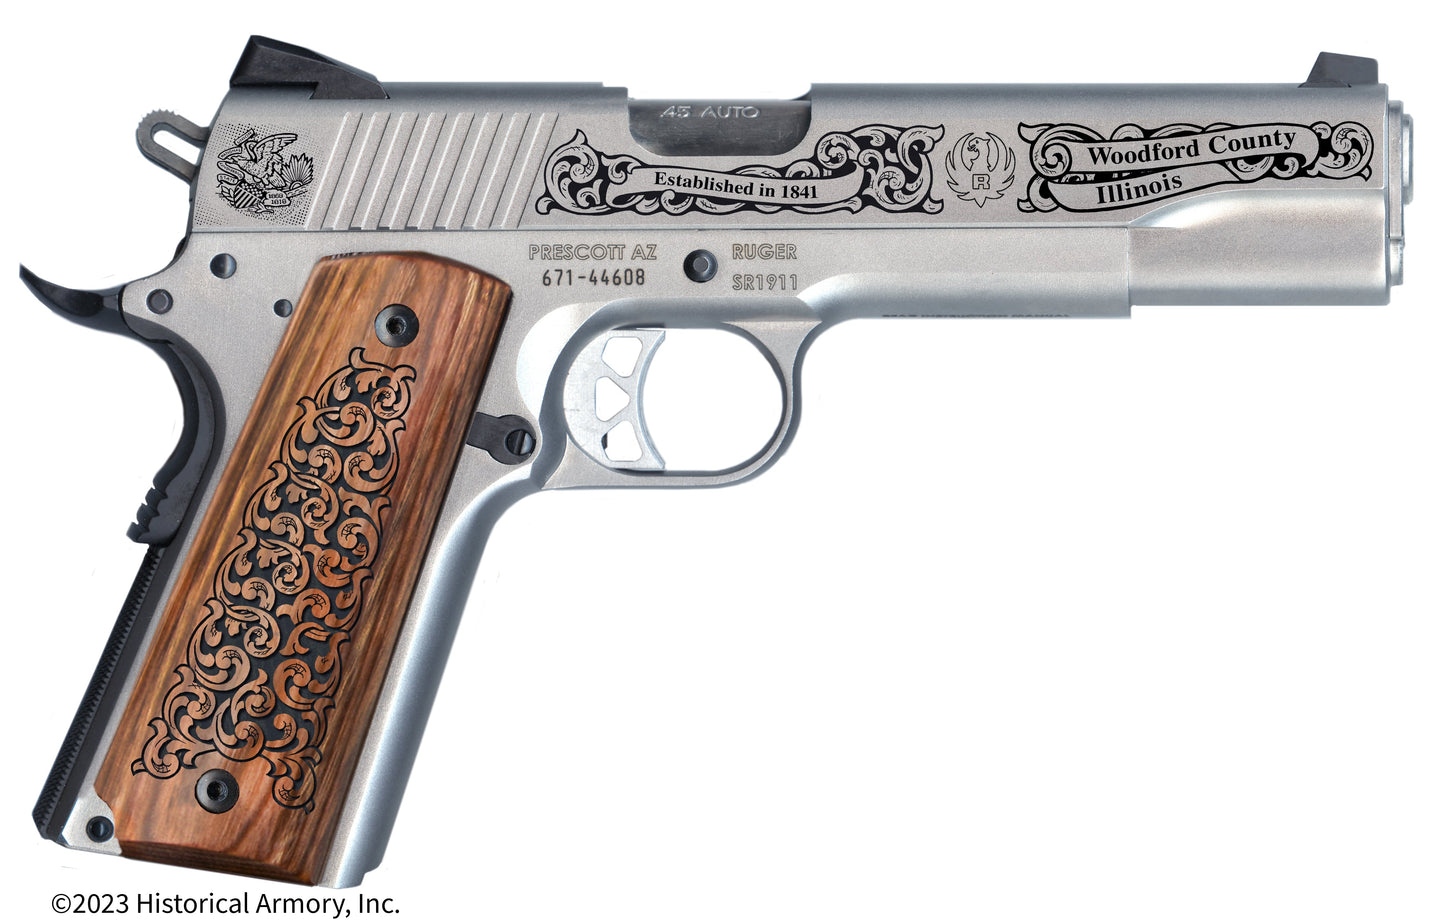 Woodford County Illinois Engraved .45 Auto Ruger 1911